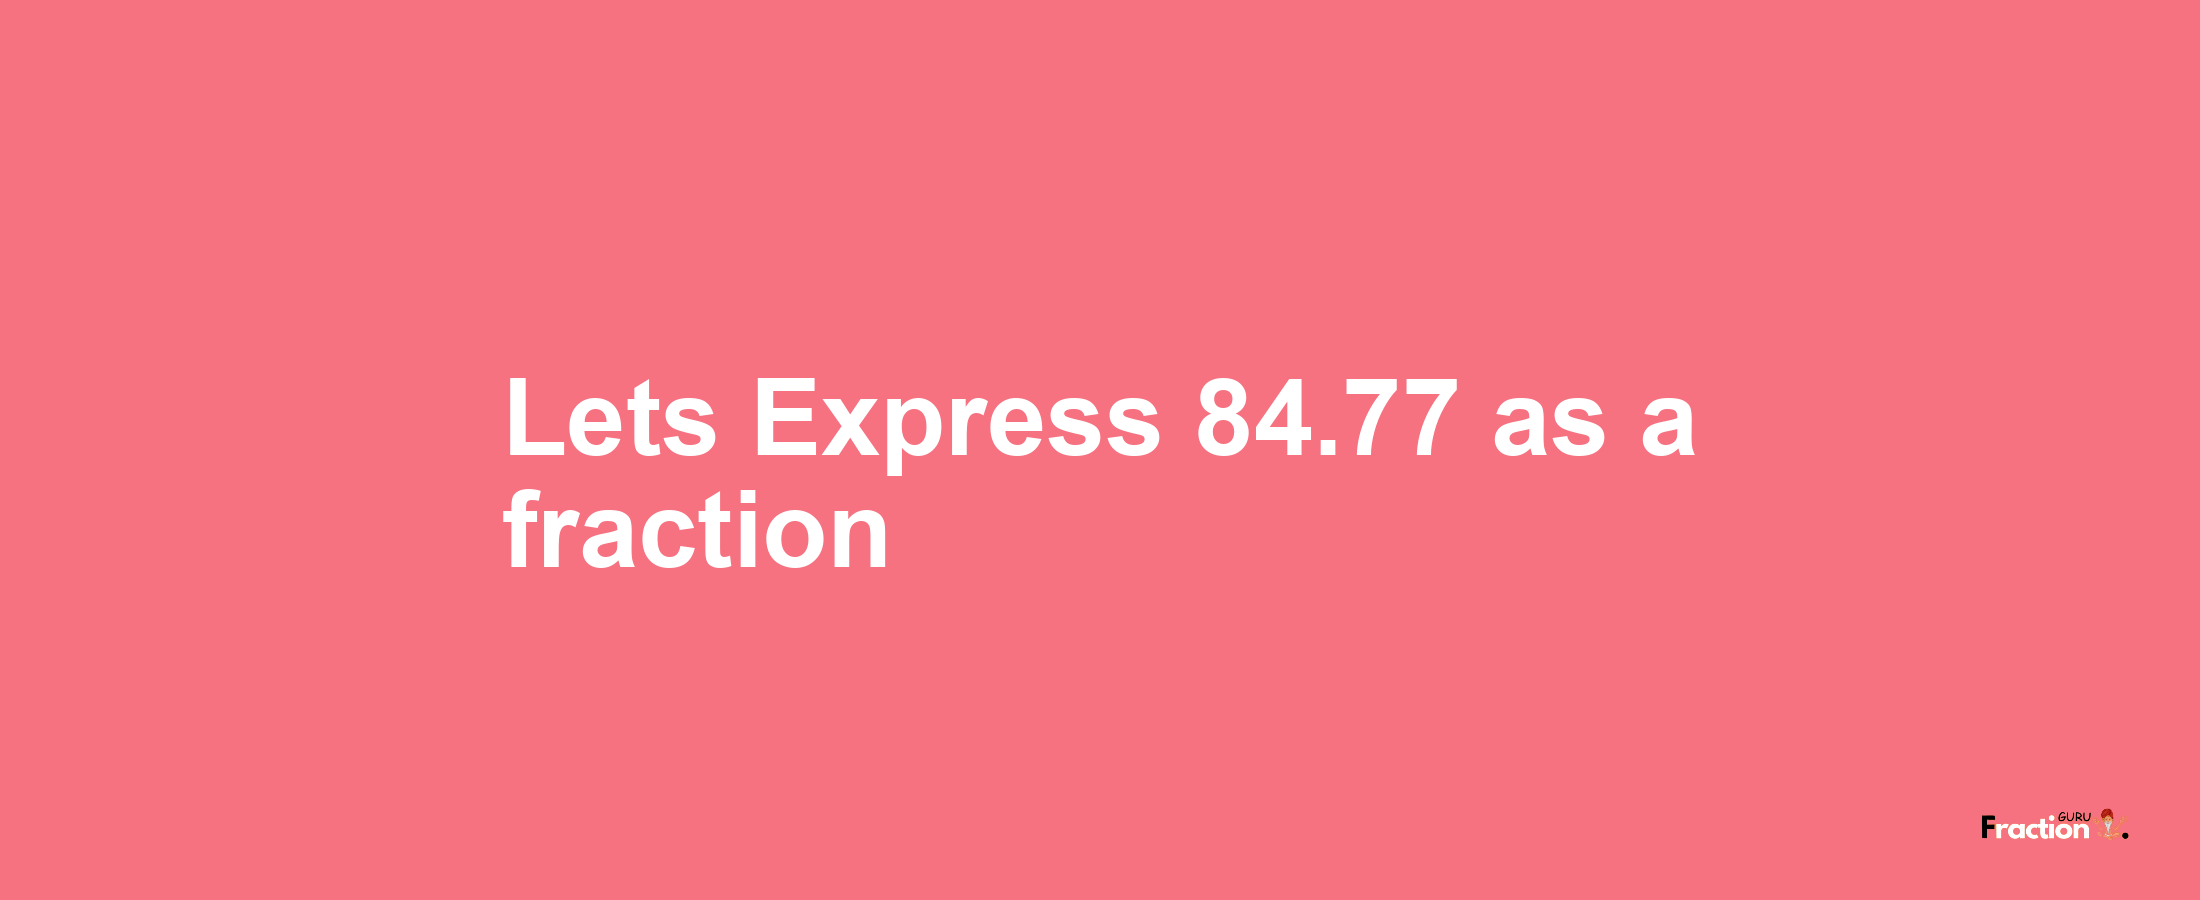 Lets Express 84.77 as afraction